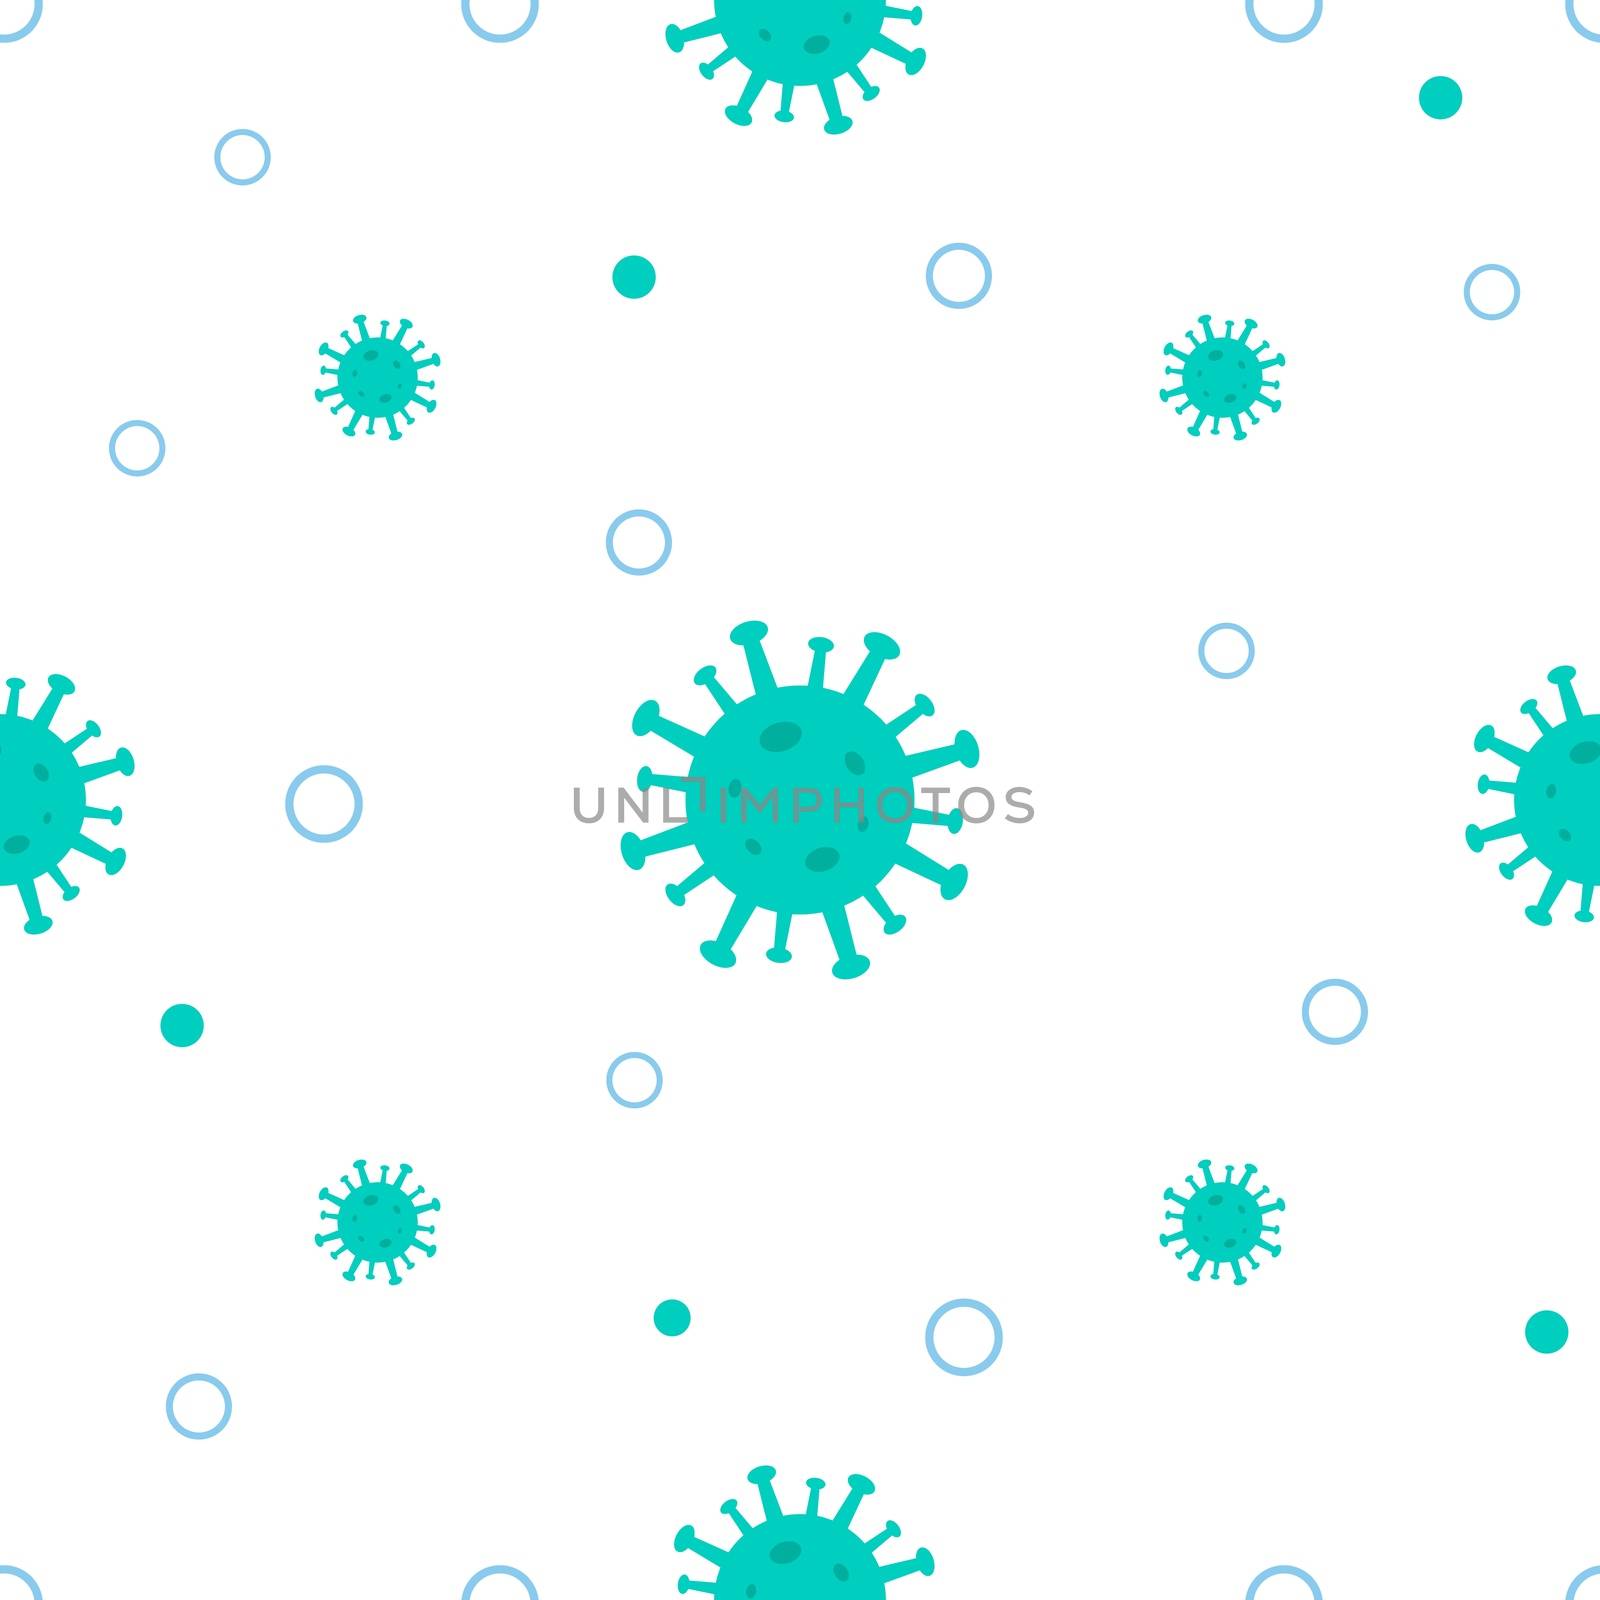 Corona virus seamless pattern. Blue green viruses of the bacteria coronavirus disease Covid-19 pandemic dangerous infectious vector texture isolated on white background. Flu and lung disease spreading